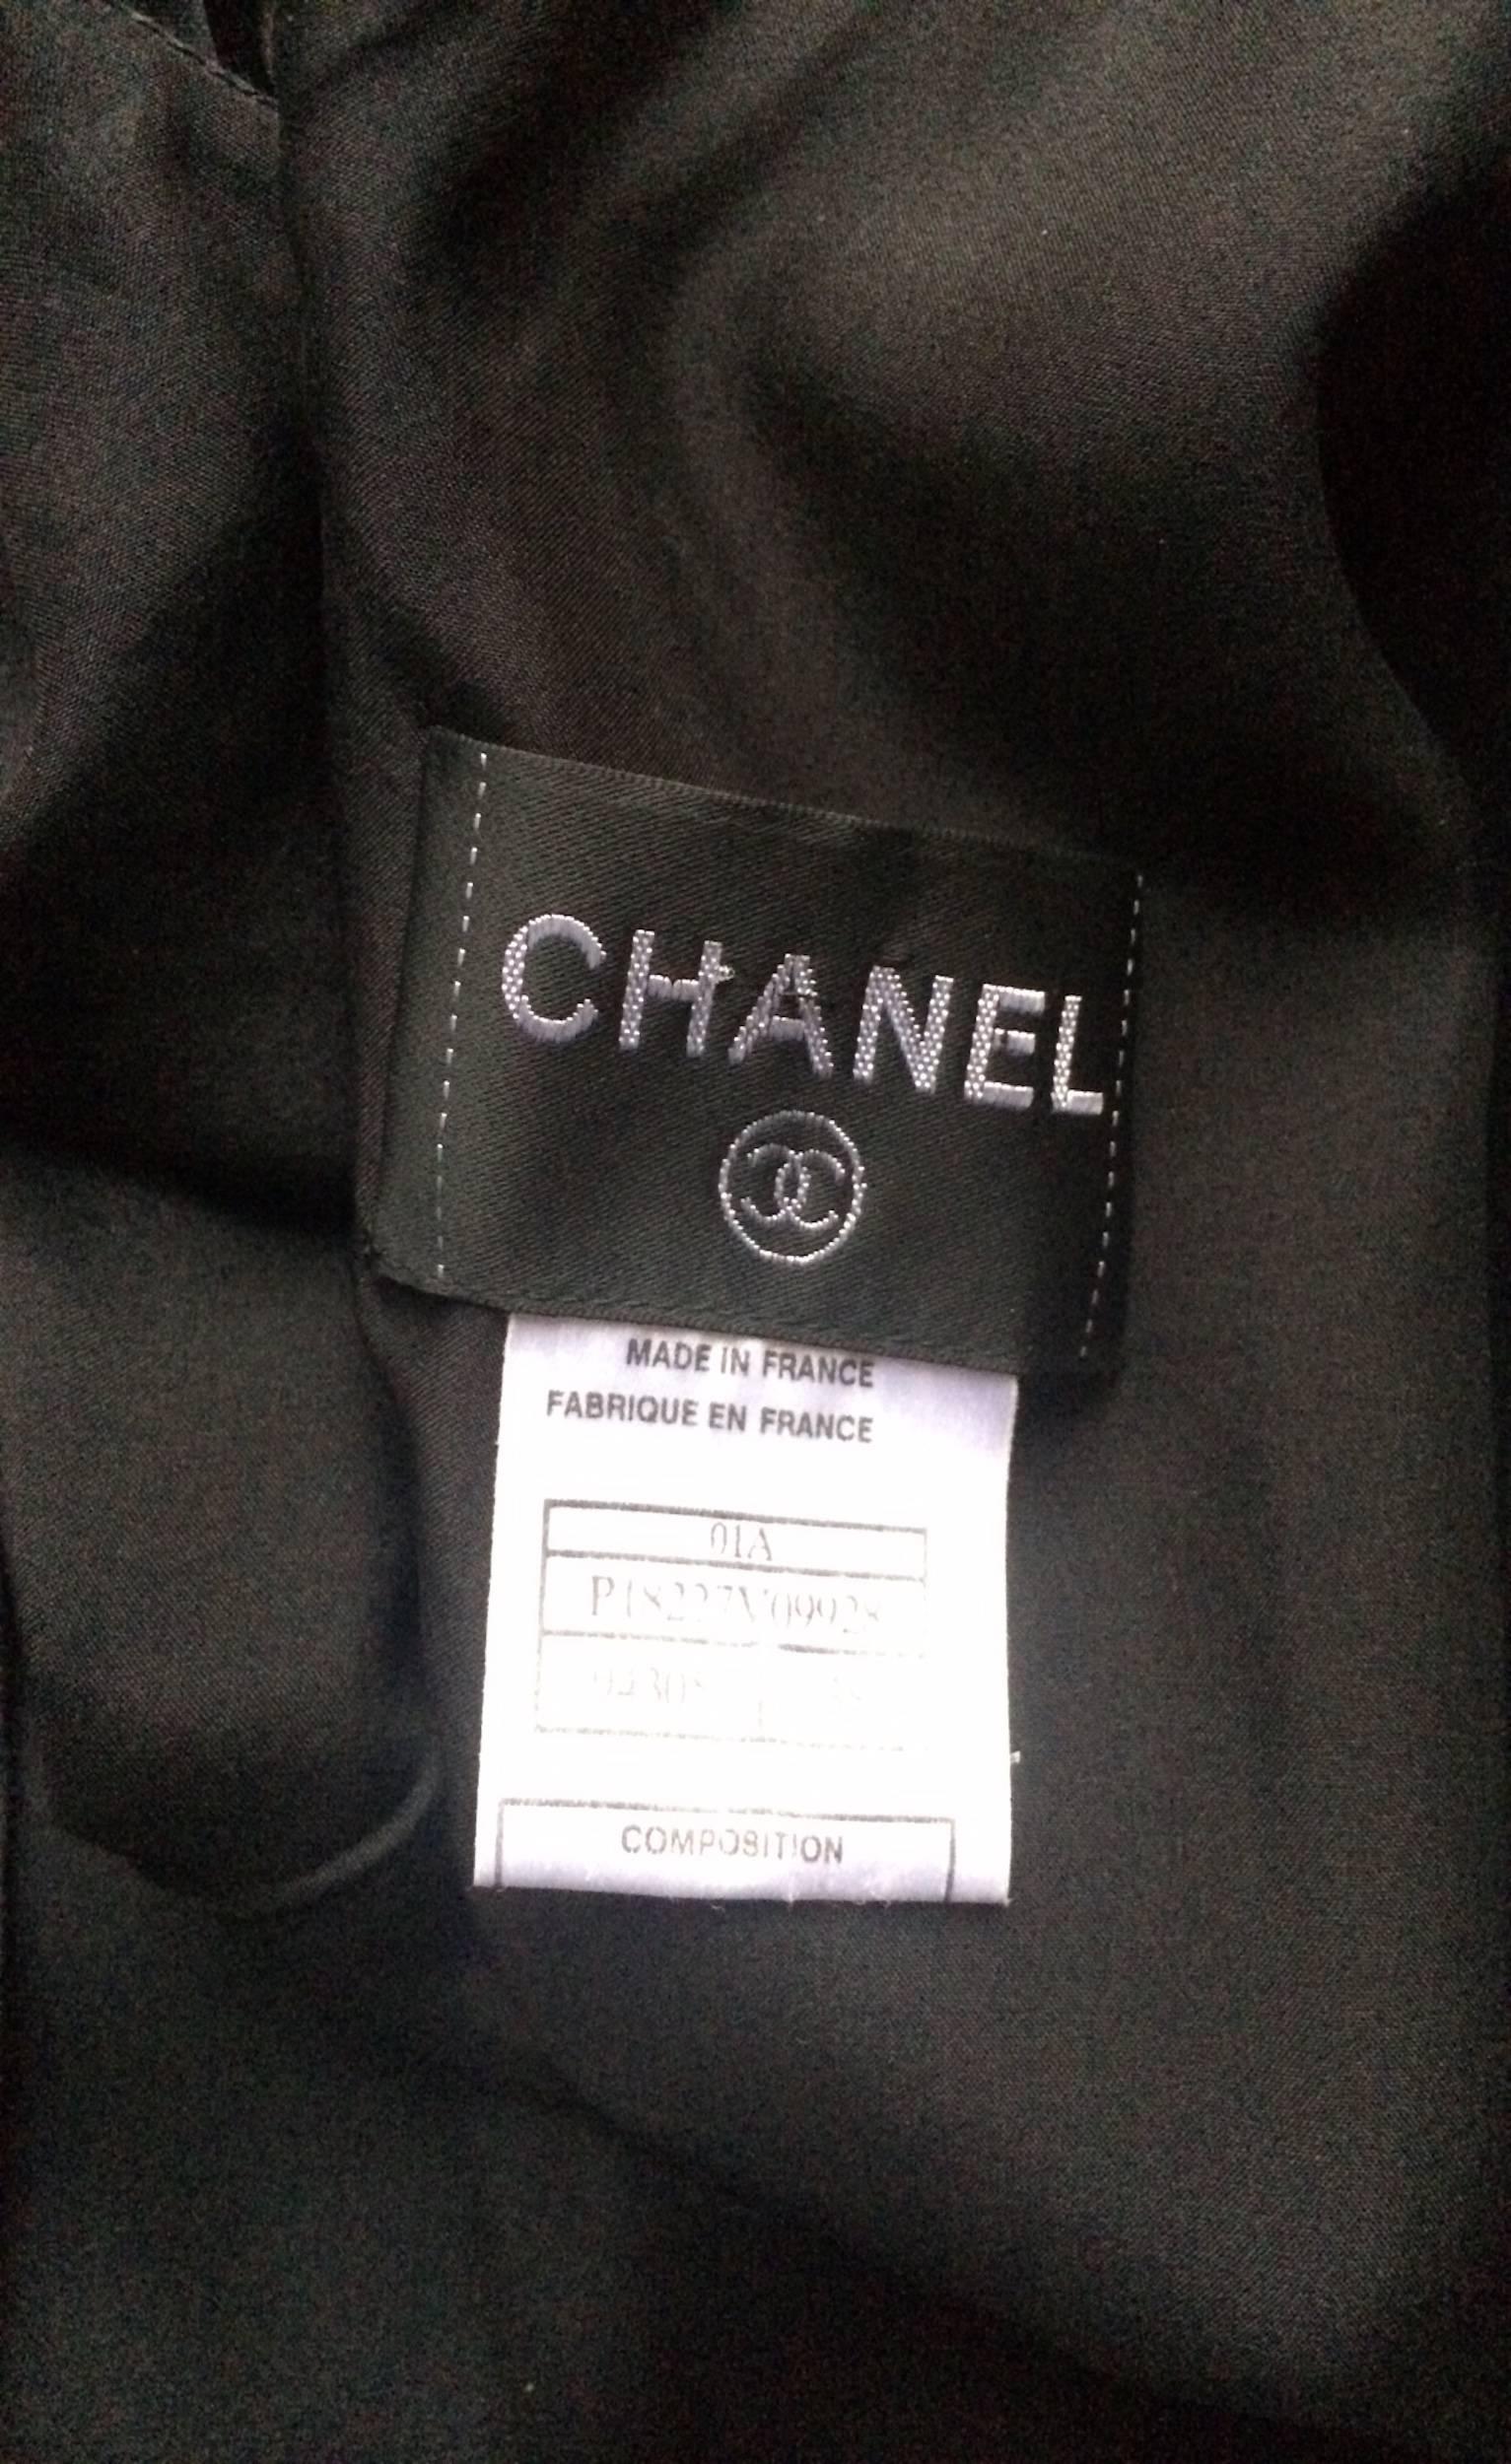 A fabulous 1990s black Chanel silk satin sleeveless cocktail dress with a nipped in waist and beautifully pleated skirt. The dress closes in the back with a row of Chanel double 'C' logo buttons. 

This item is in overall very good vintage